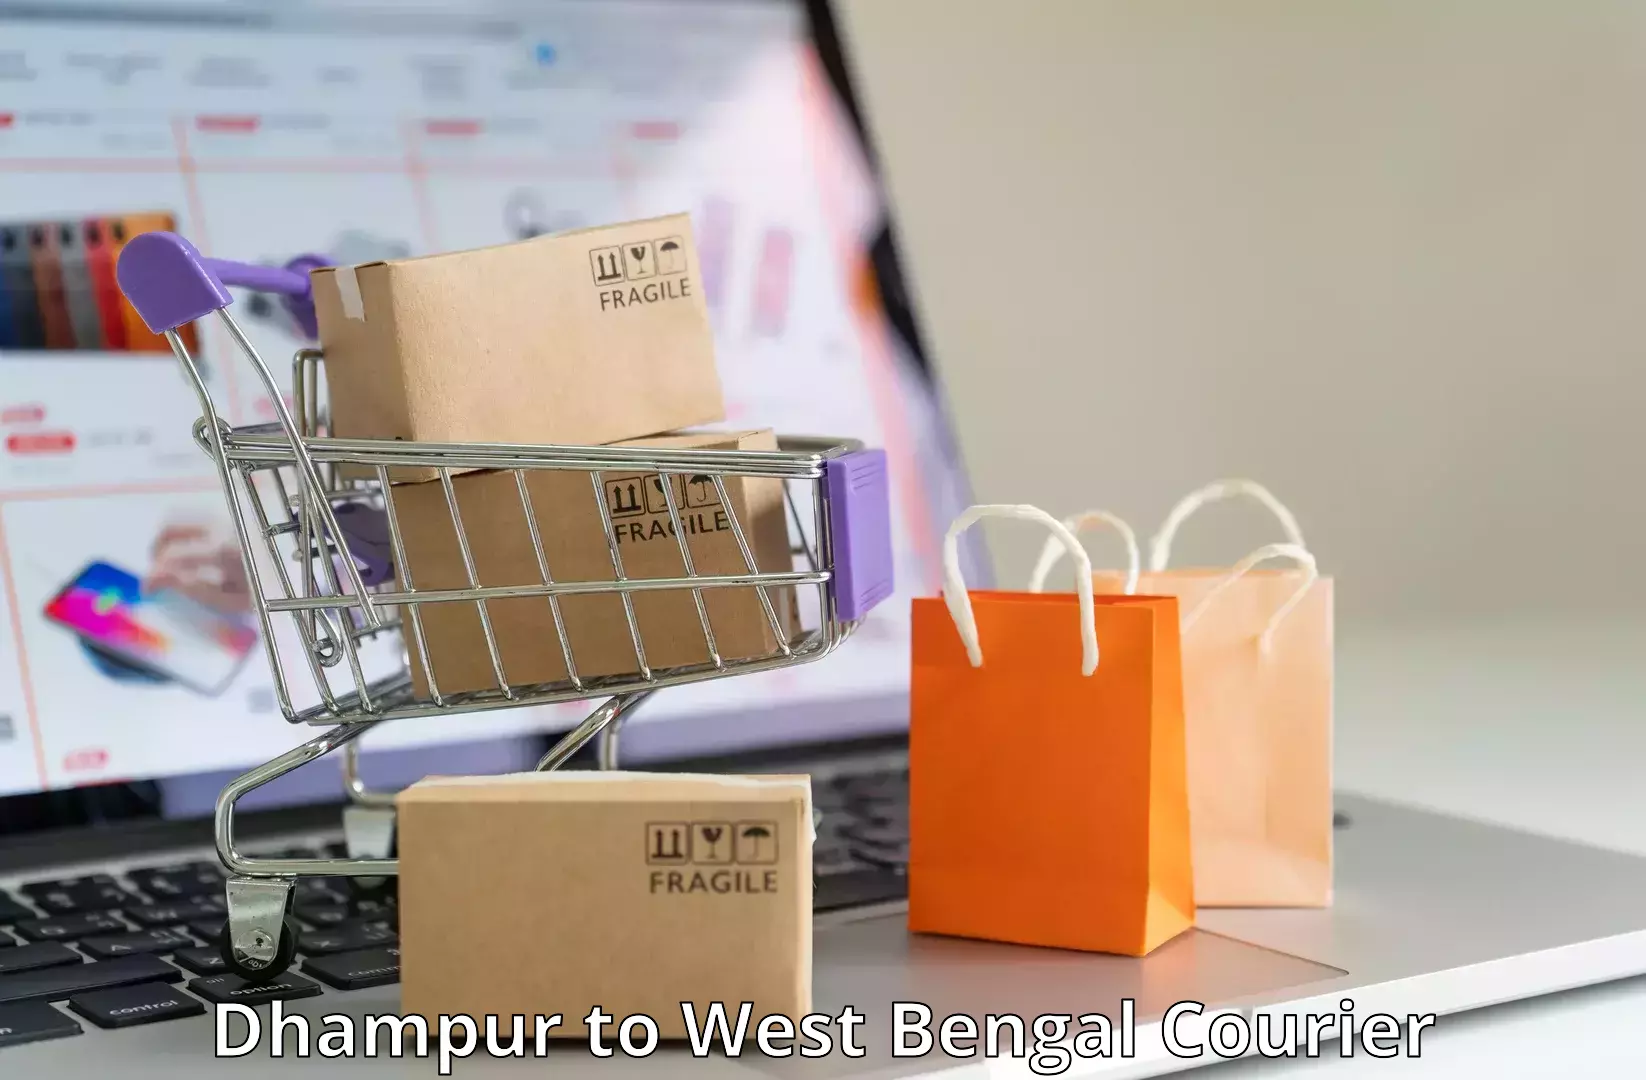 Multi-national courier services Dhampur to West Bengal